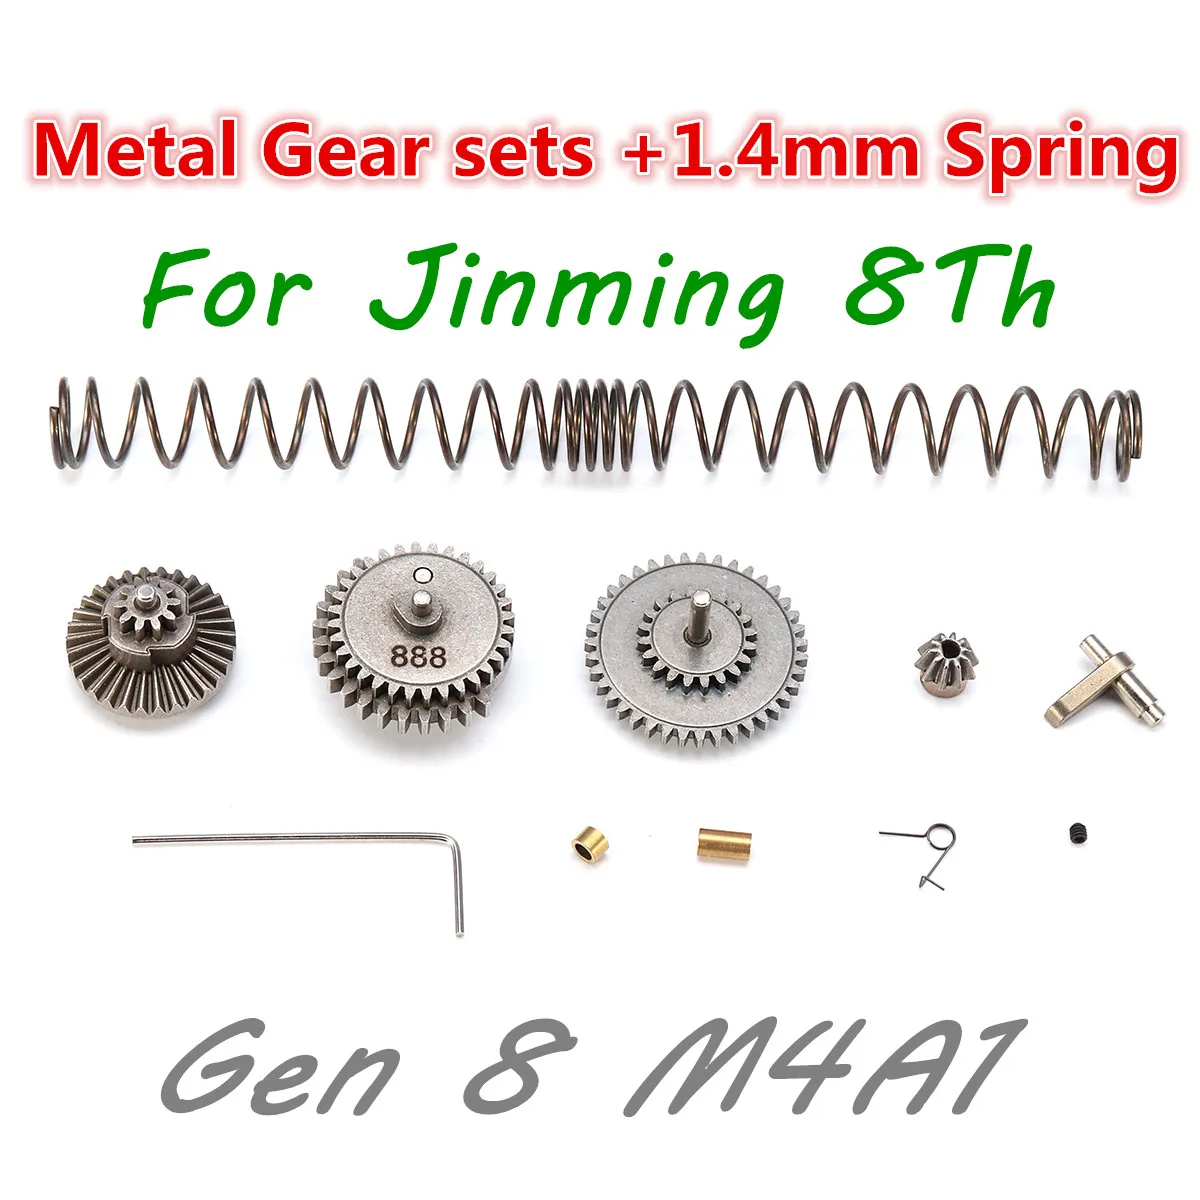 Details about   Jinming Upgrade Piston Head 8 Holes For Gen 8 Gearbox Gel Ball M4A1 Part Kit 